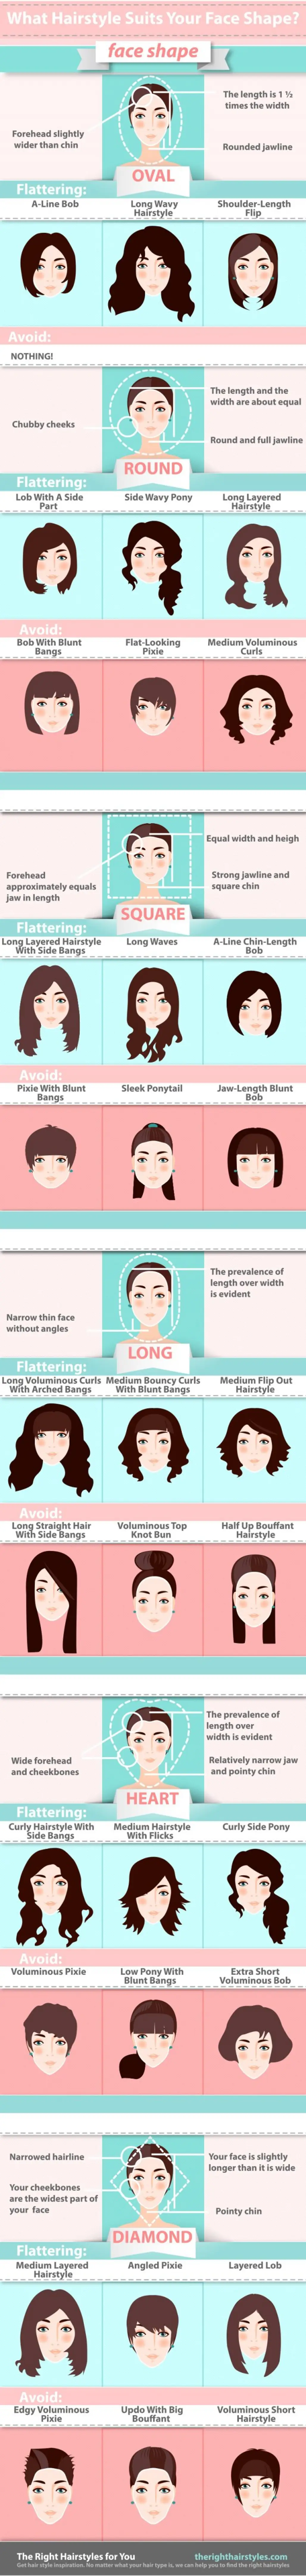 What Hairstyle Will Suit Your Face Shape?